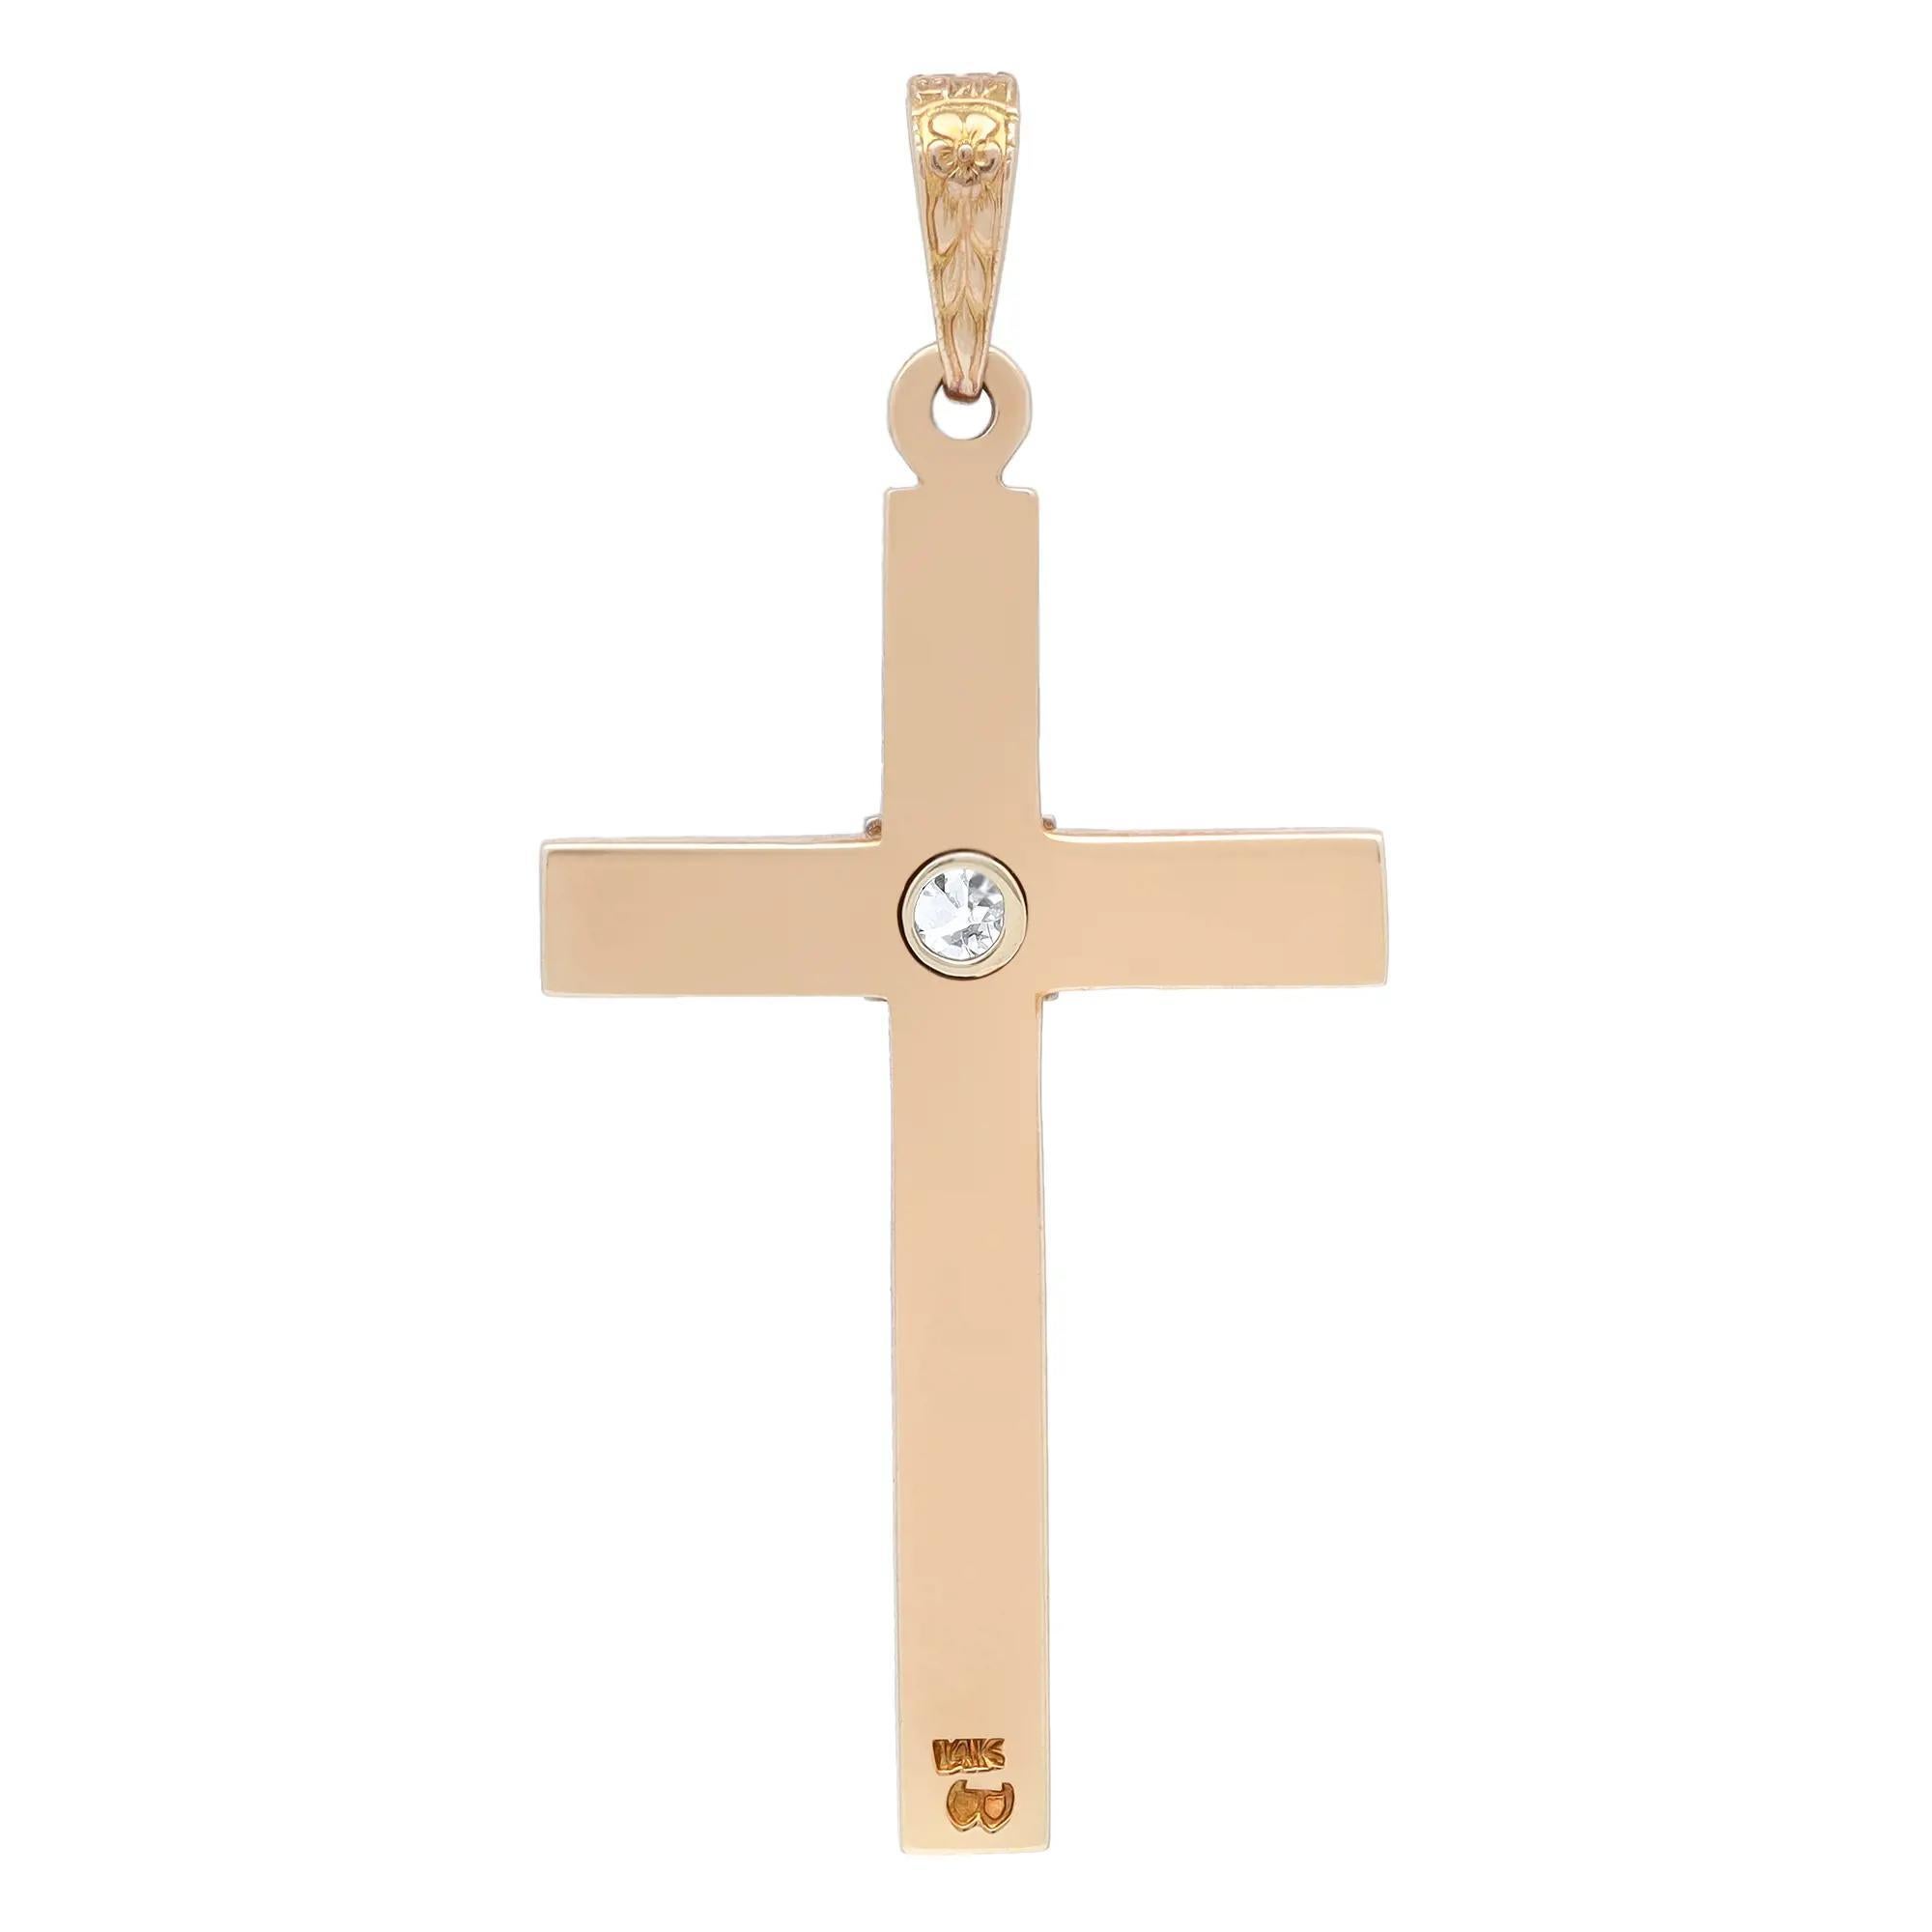 This meaningful cross pendant shines in lustrous 14K yellow gold. Features a textured cross with a center prong set round brilliant cut diamond weighing 0.09 carat. Pendant size: 33mm x 20.3mm. Total weight: 3.29 grams. Minimalist and stylish,